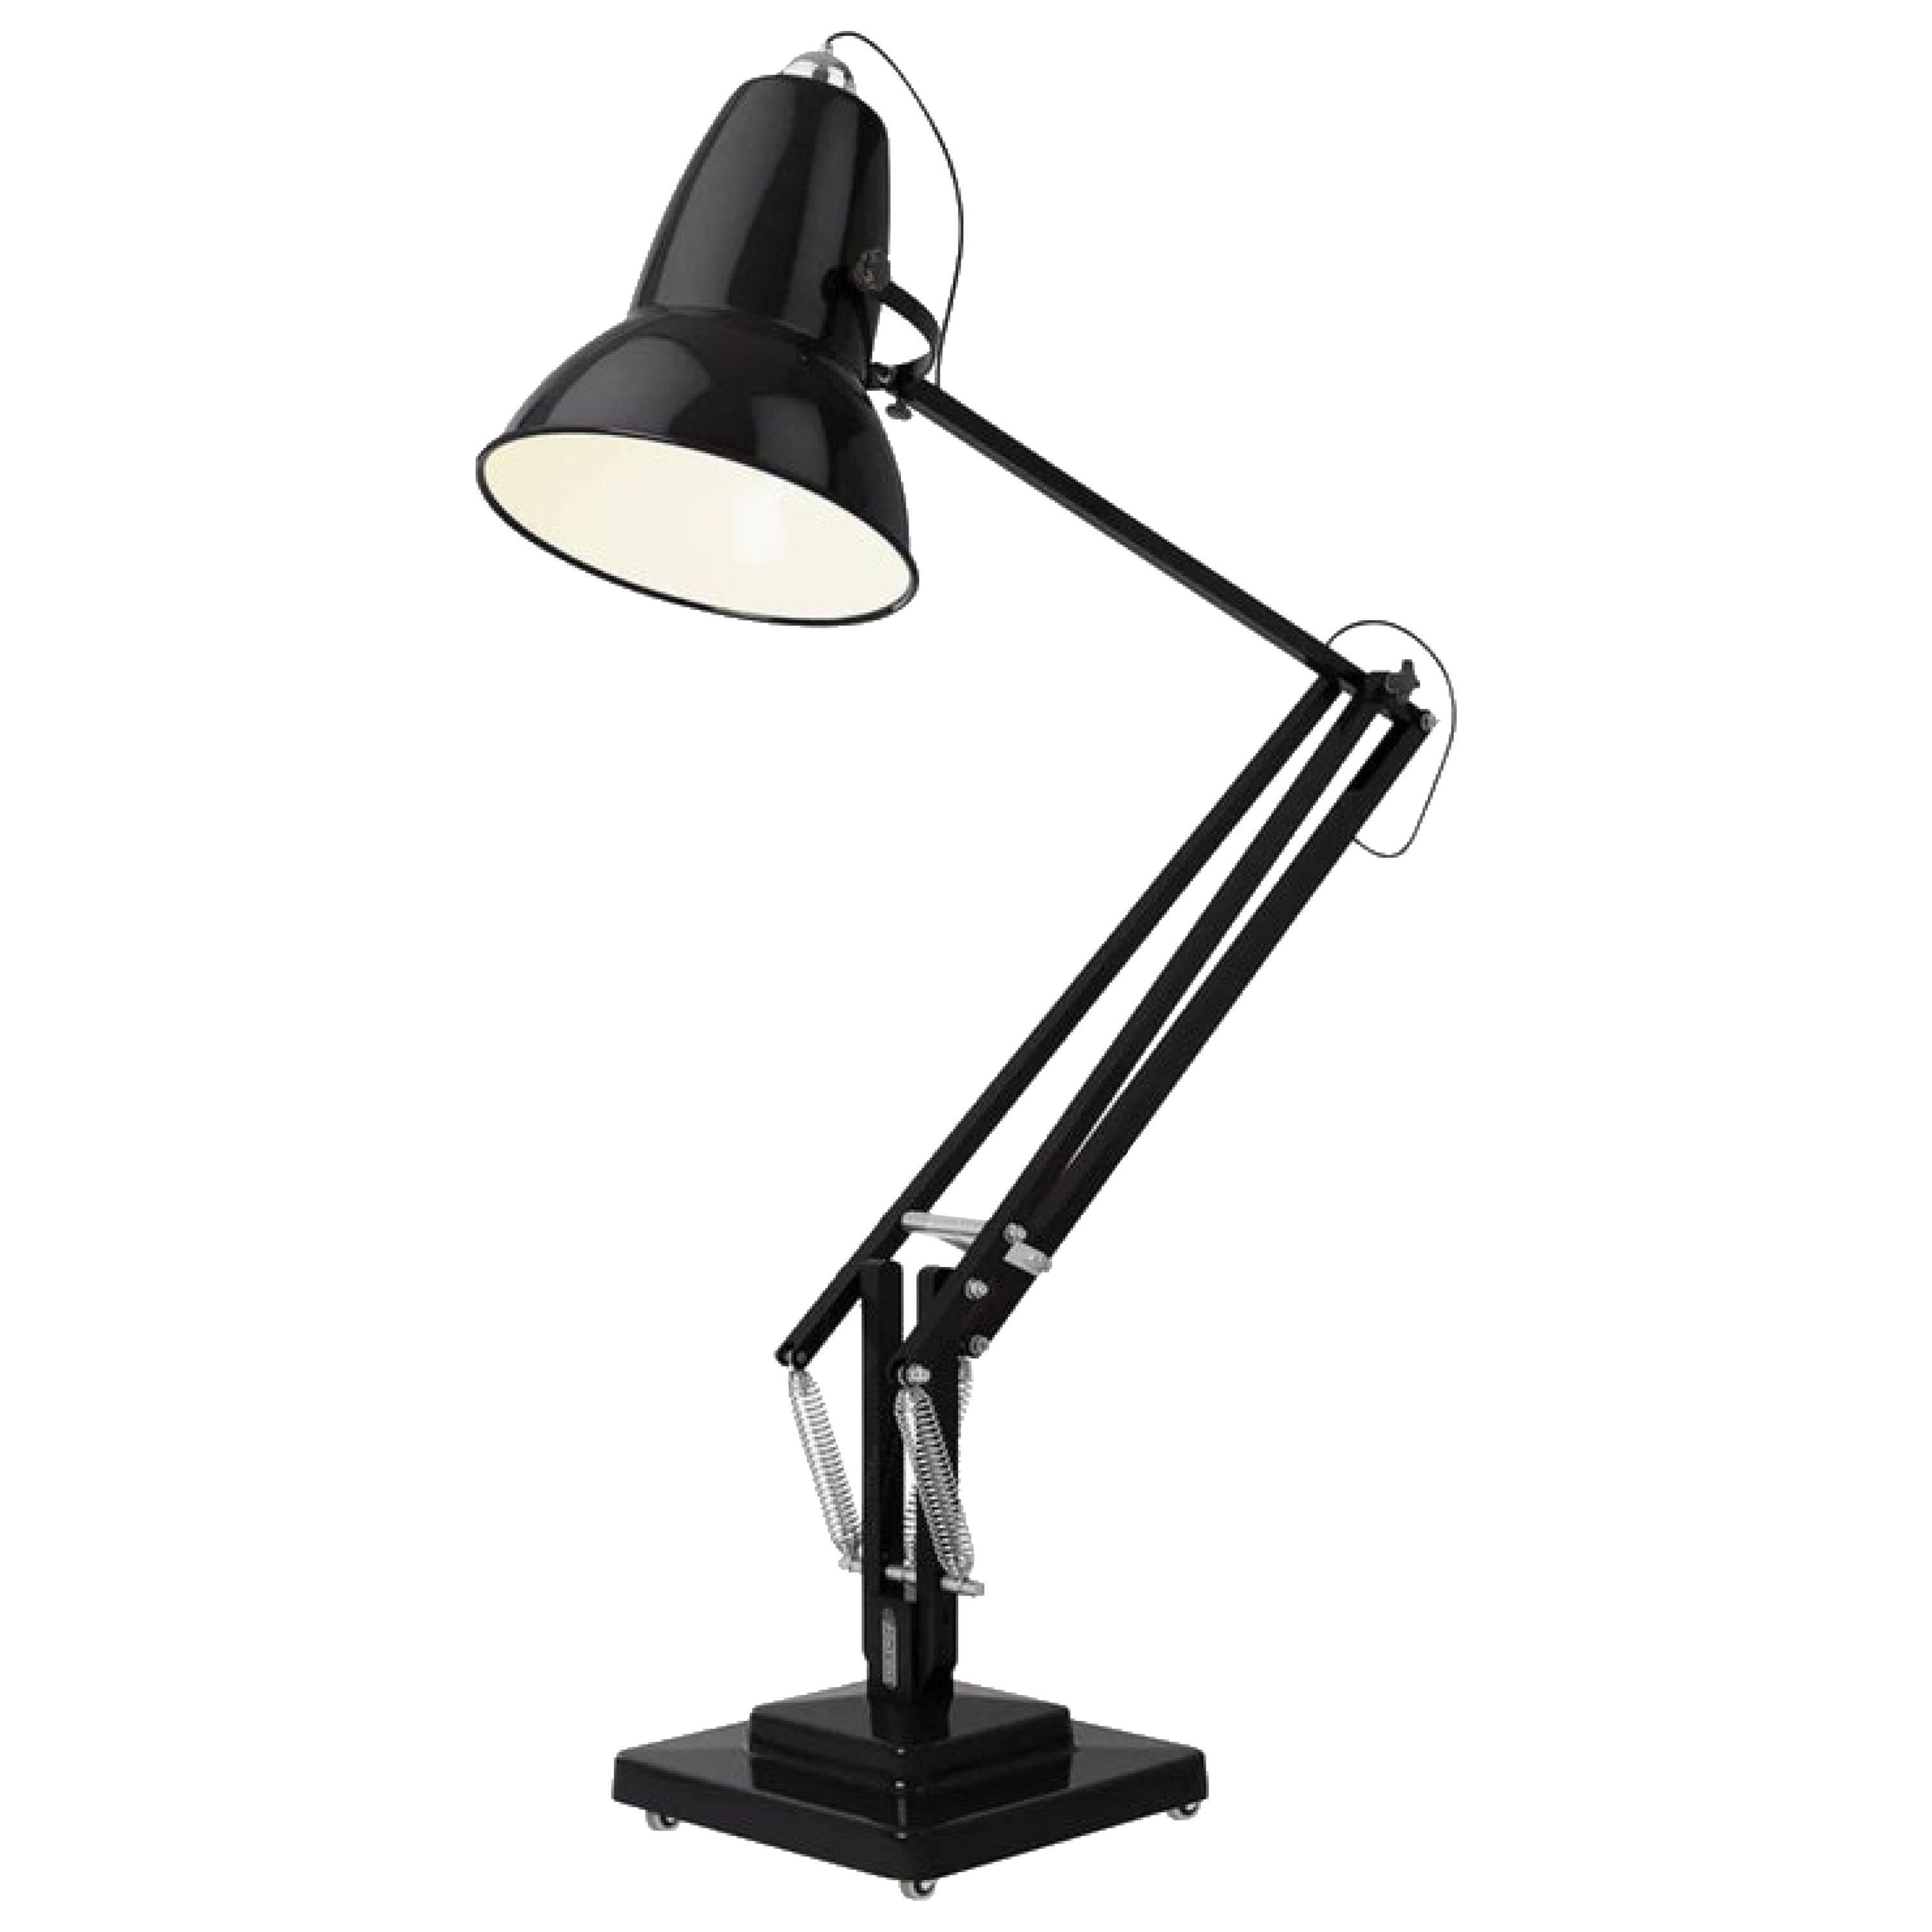 Original 1227 jet black giant floor lamp by George Carwardine for Anglepoise, UK. For years, George Carwardine worked as an automobile engineer for Horstmann Cars Limited, working on vehicle suspension systems. When the company went bankrupt in